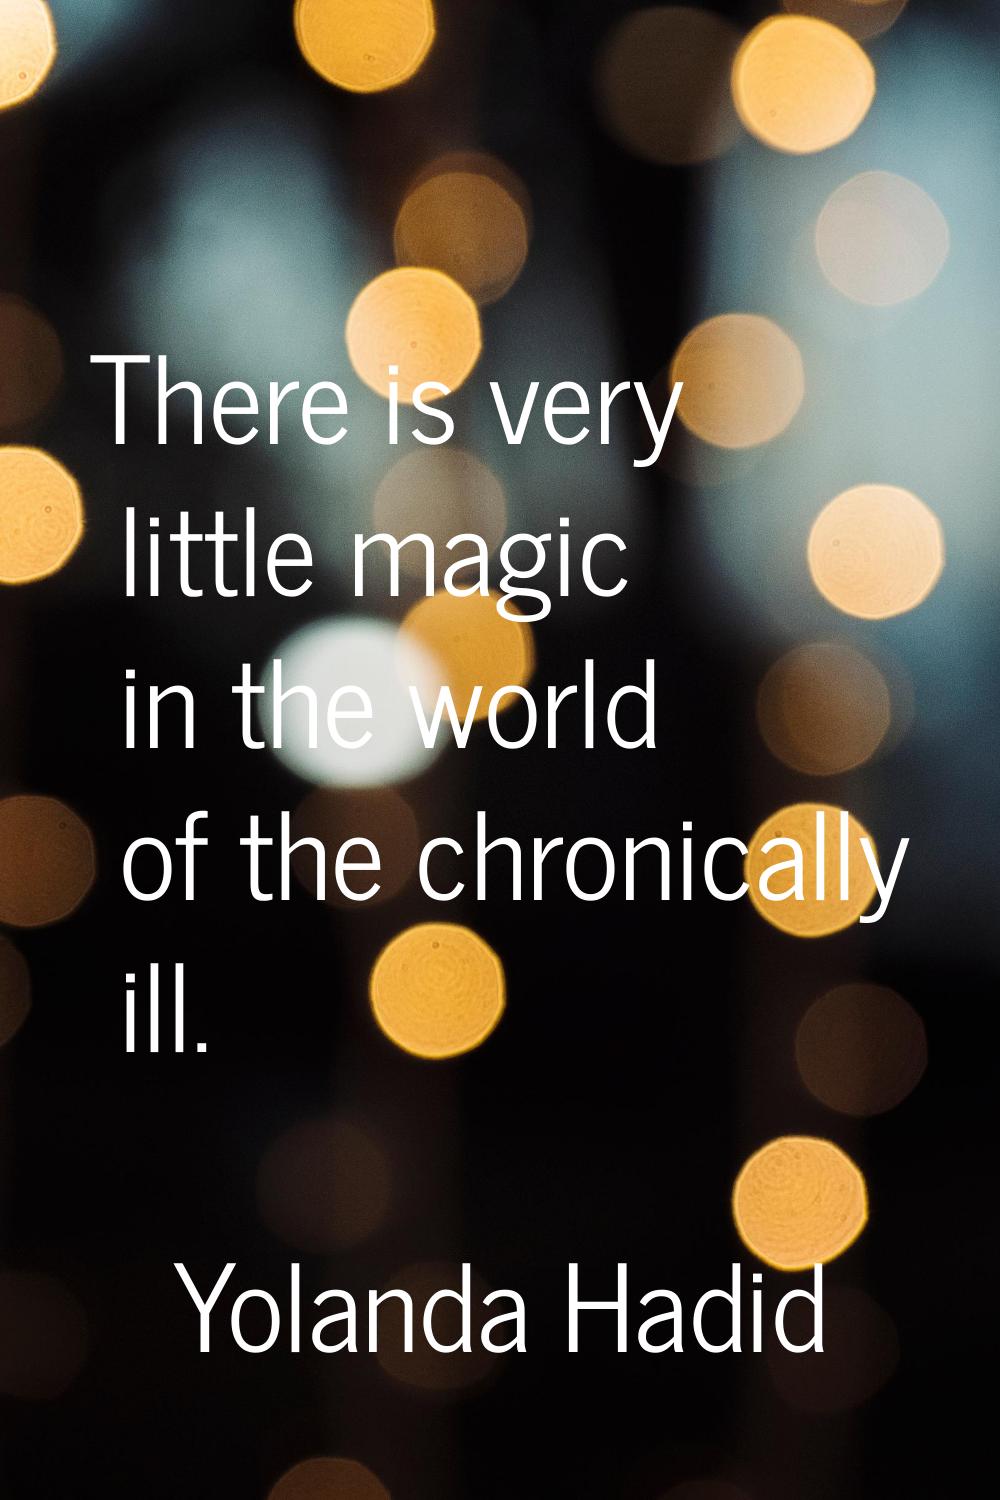 There is very little magic in the world of the chronically ill.